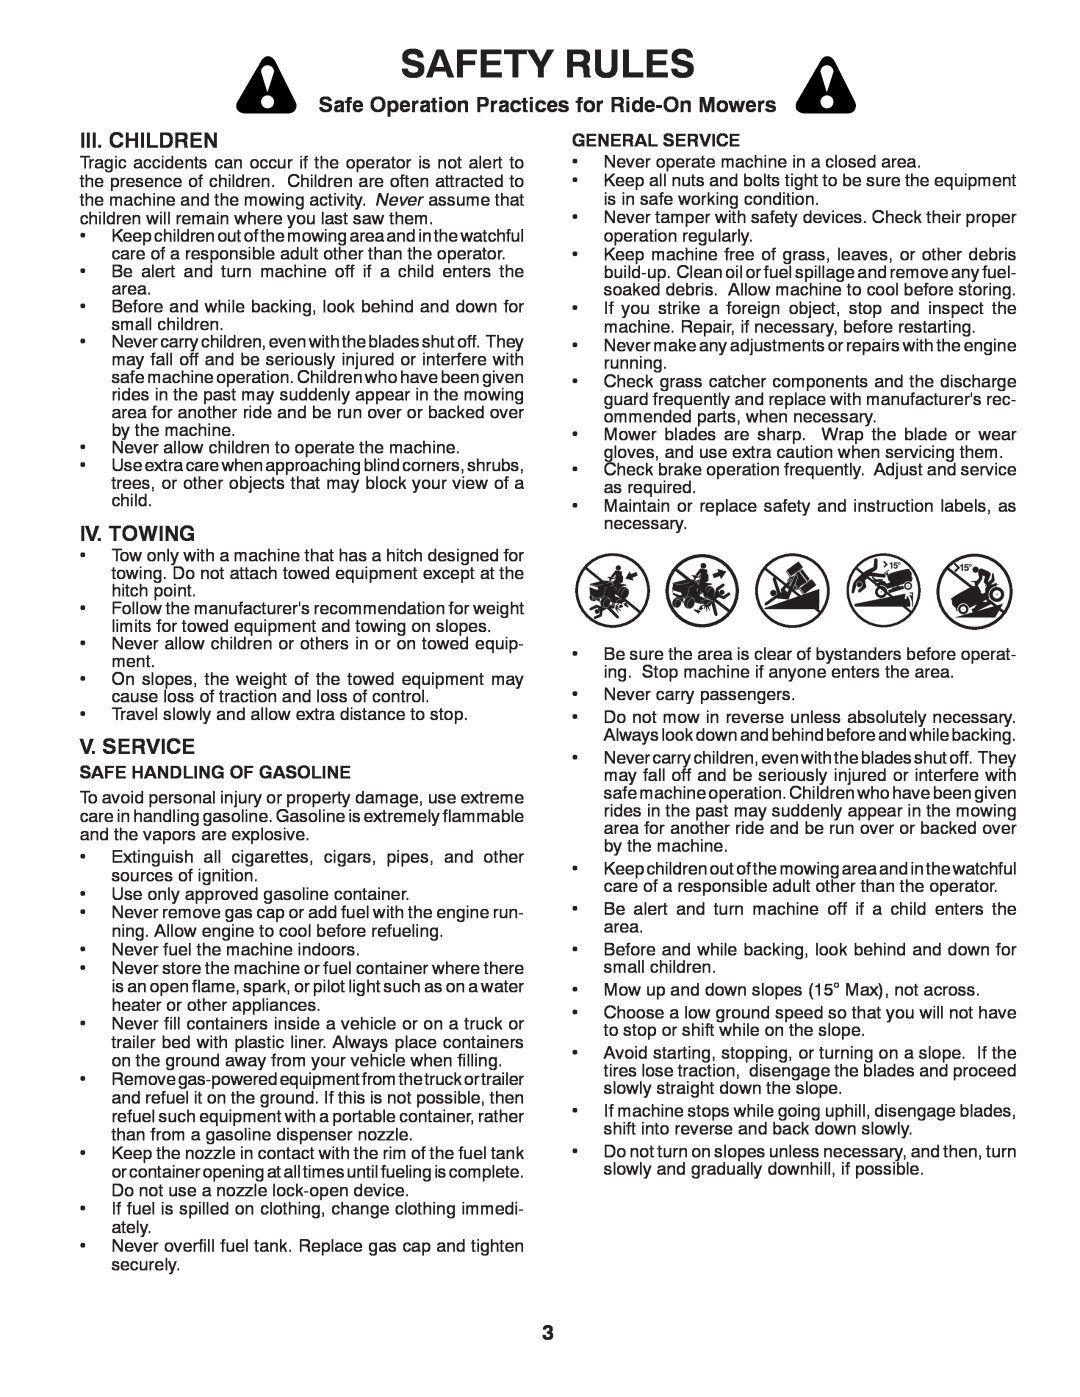 Poulan 419756 manual Safety Rules, Safe Operation Practices for Ride-On Mowers, Iii. Children, Iv. Towing, V. Service 